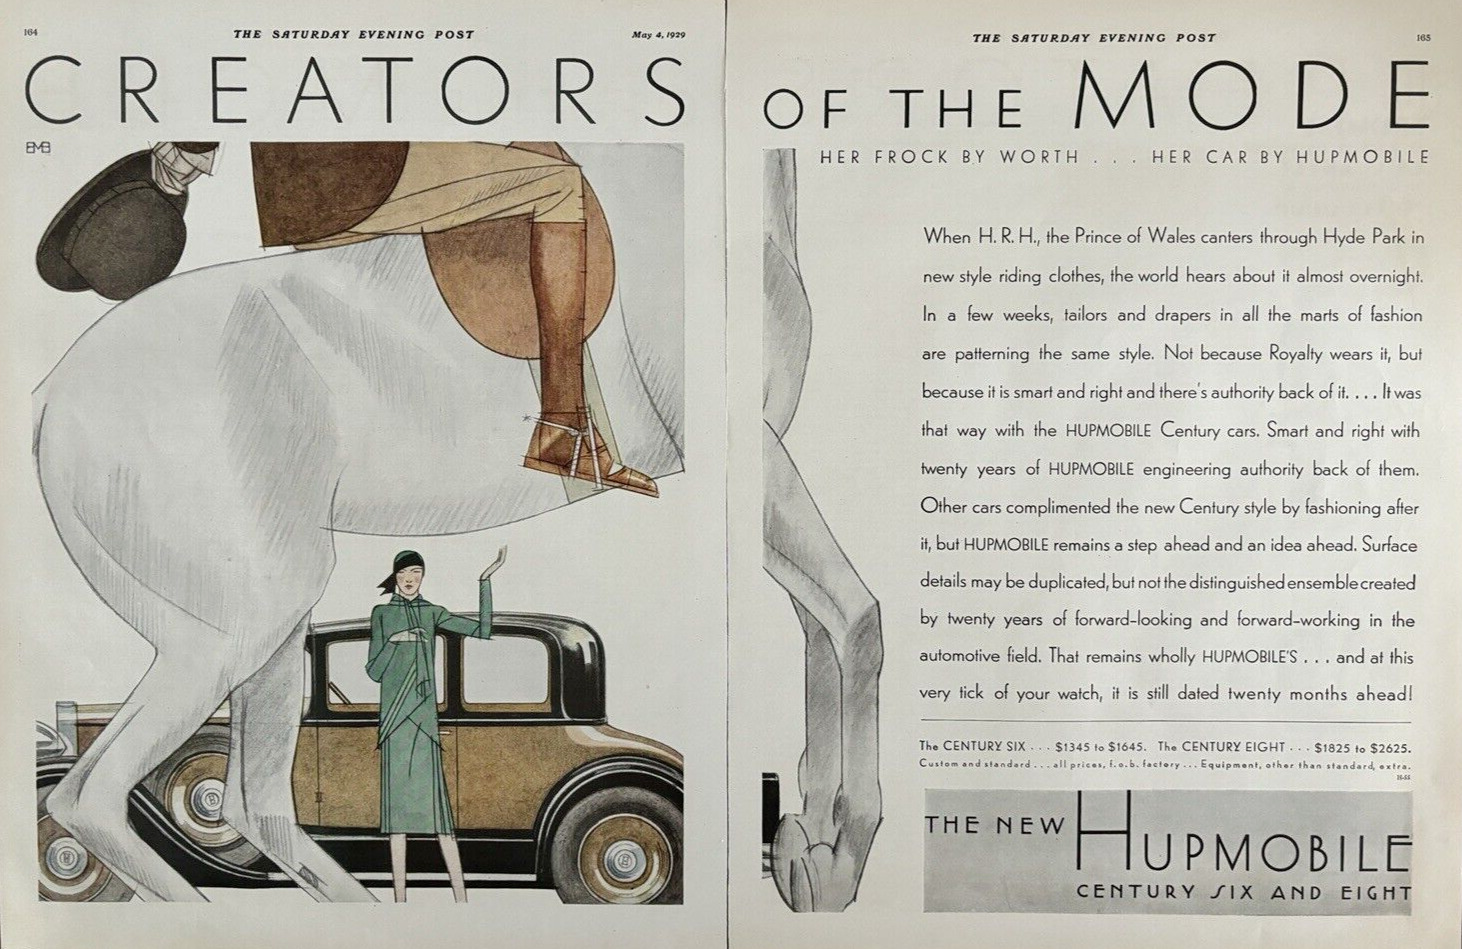 1929 Hupmobile Automobile Six Eight Horse HRH Prince Of Wales Car VTG Print Ad